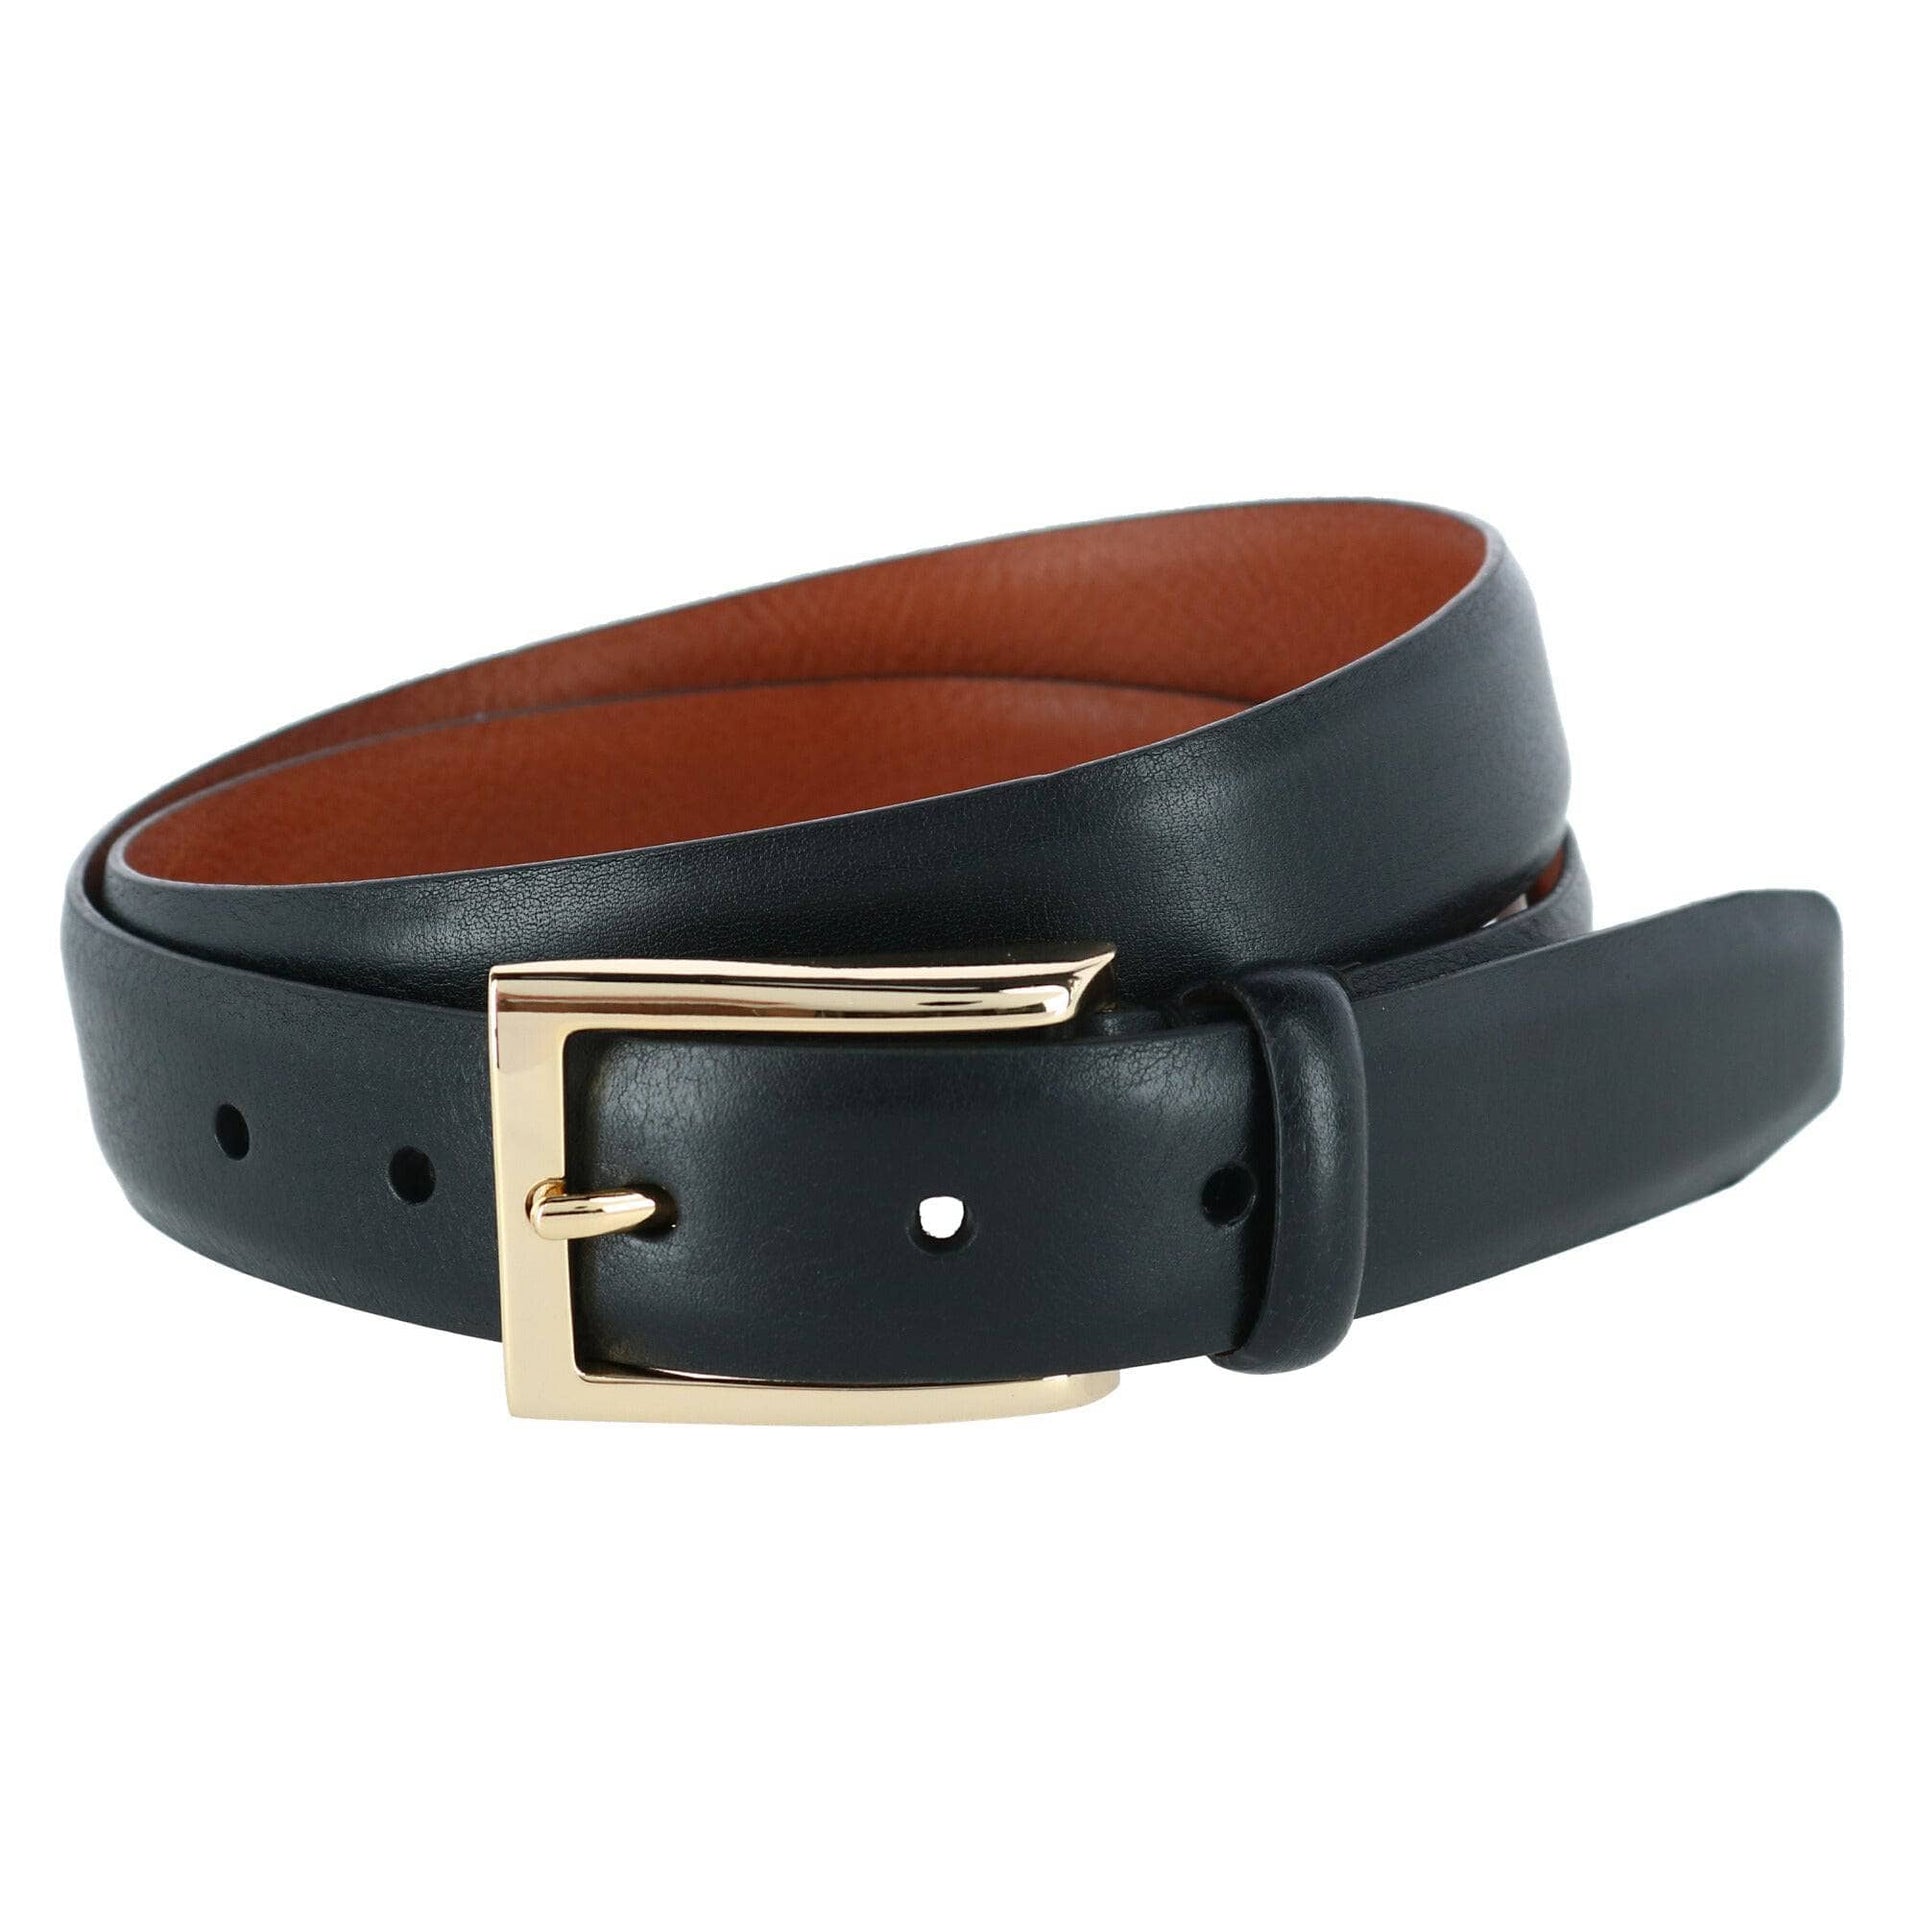 Andrew 30mm Milled Finish Leather Dress Belt